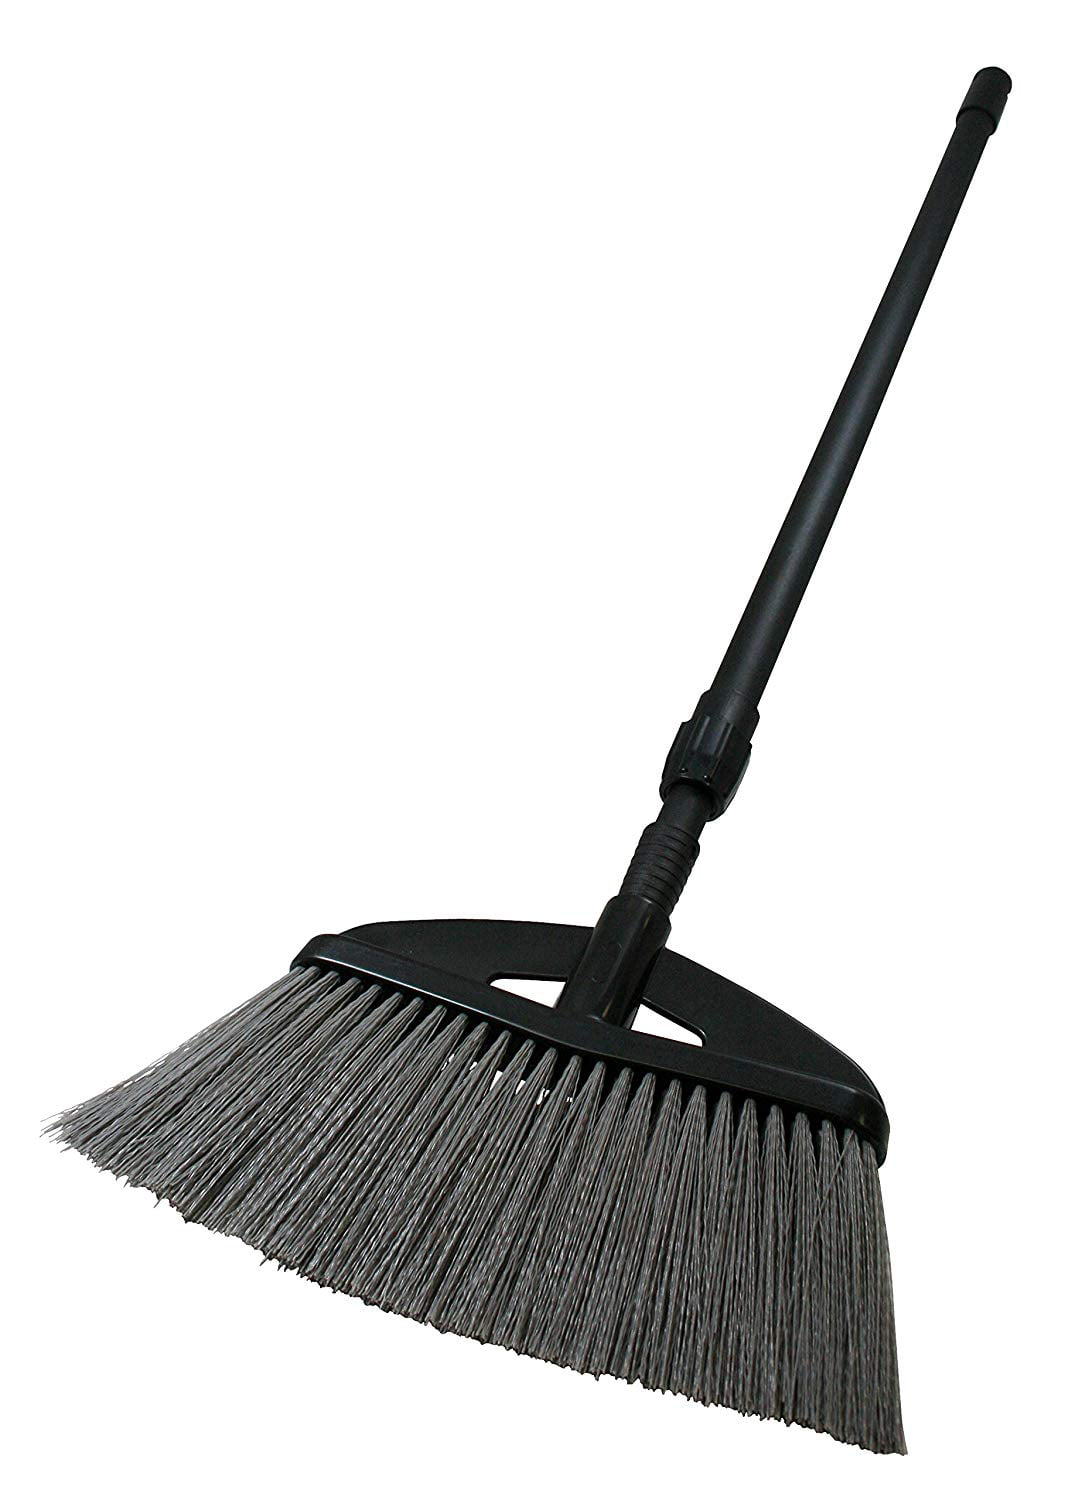 BroomX Expandable Broom Expandable 13.5-21 inch Multi Surface Lightweight Broom 